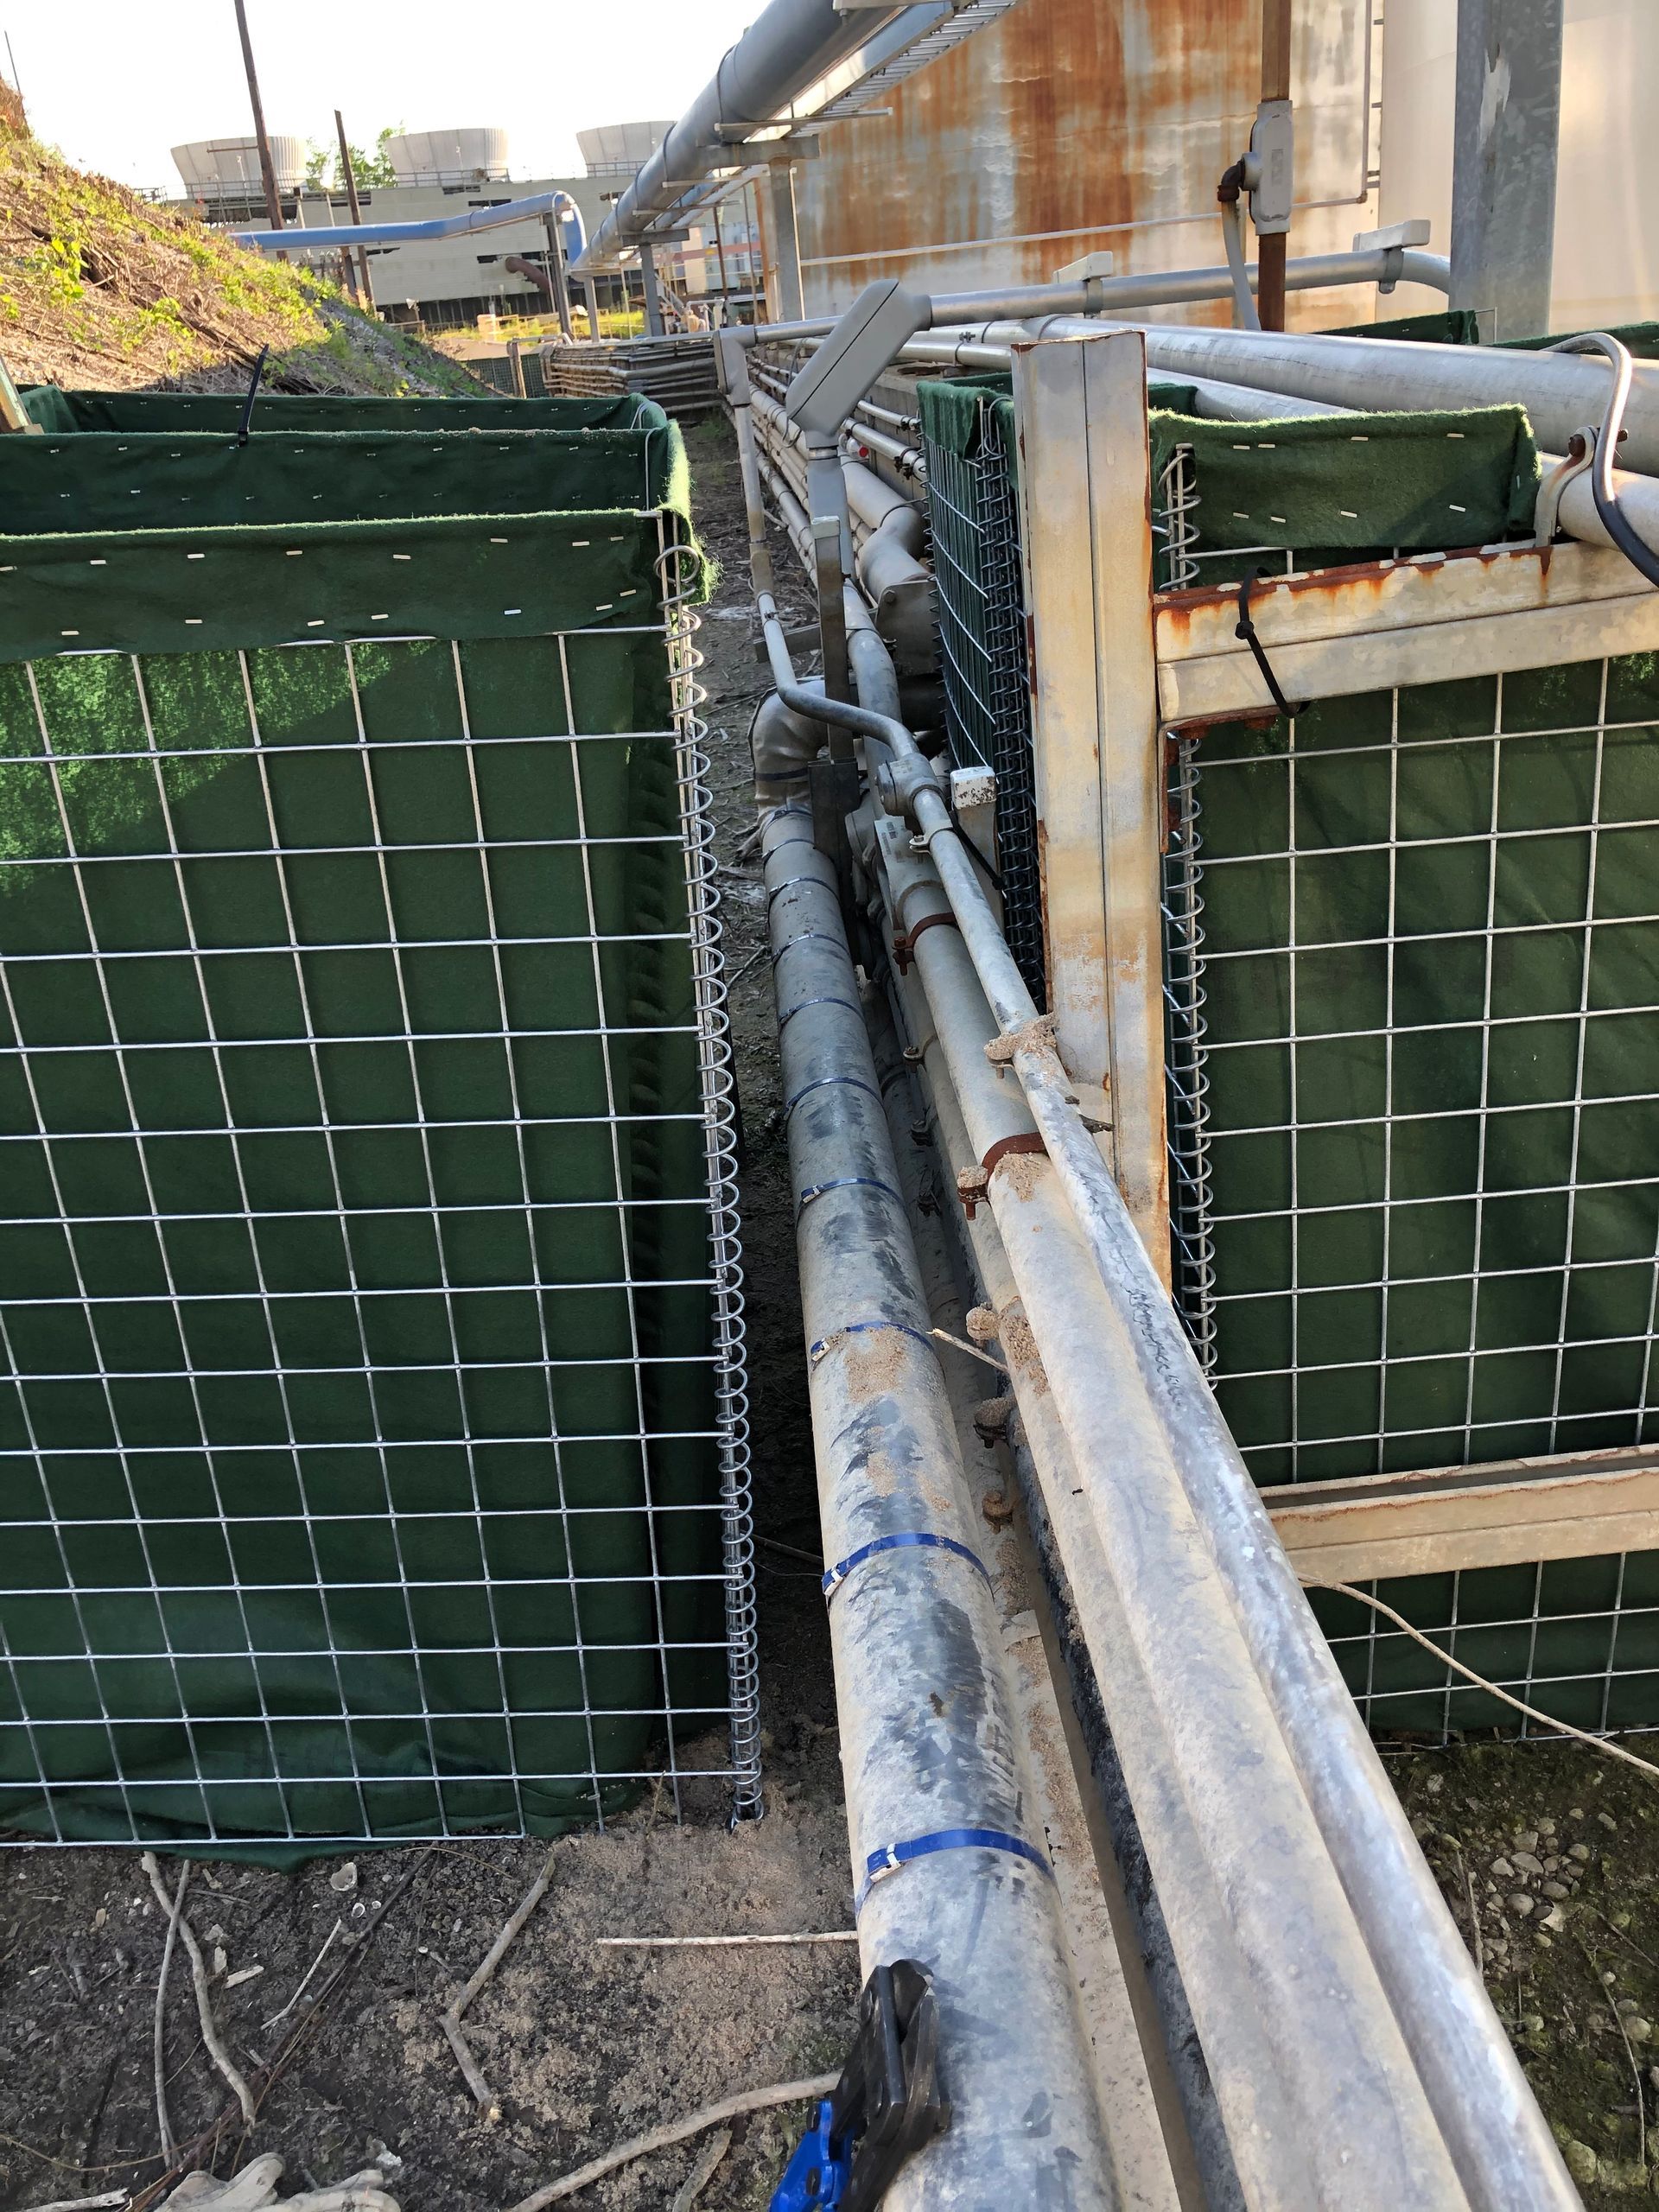 How to protect pipes and critical infrastructure from flooding using a modified HESCO Flood Barrier